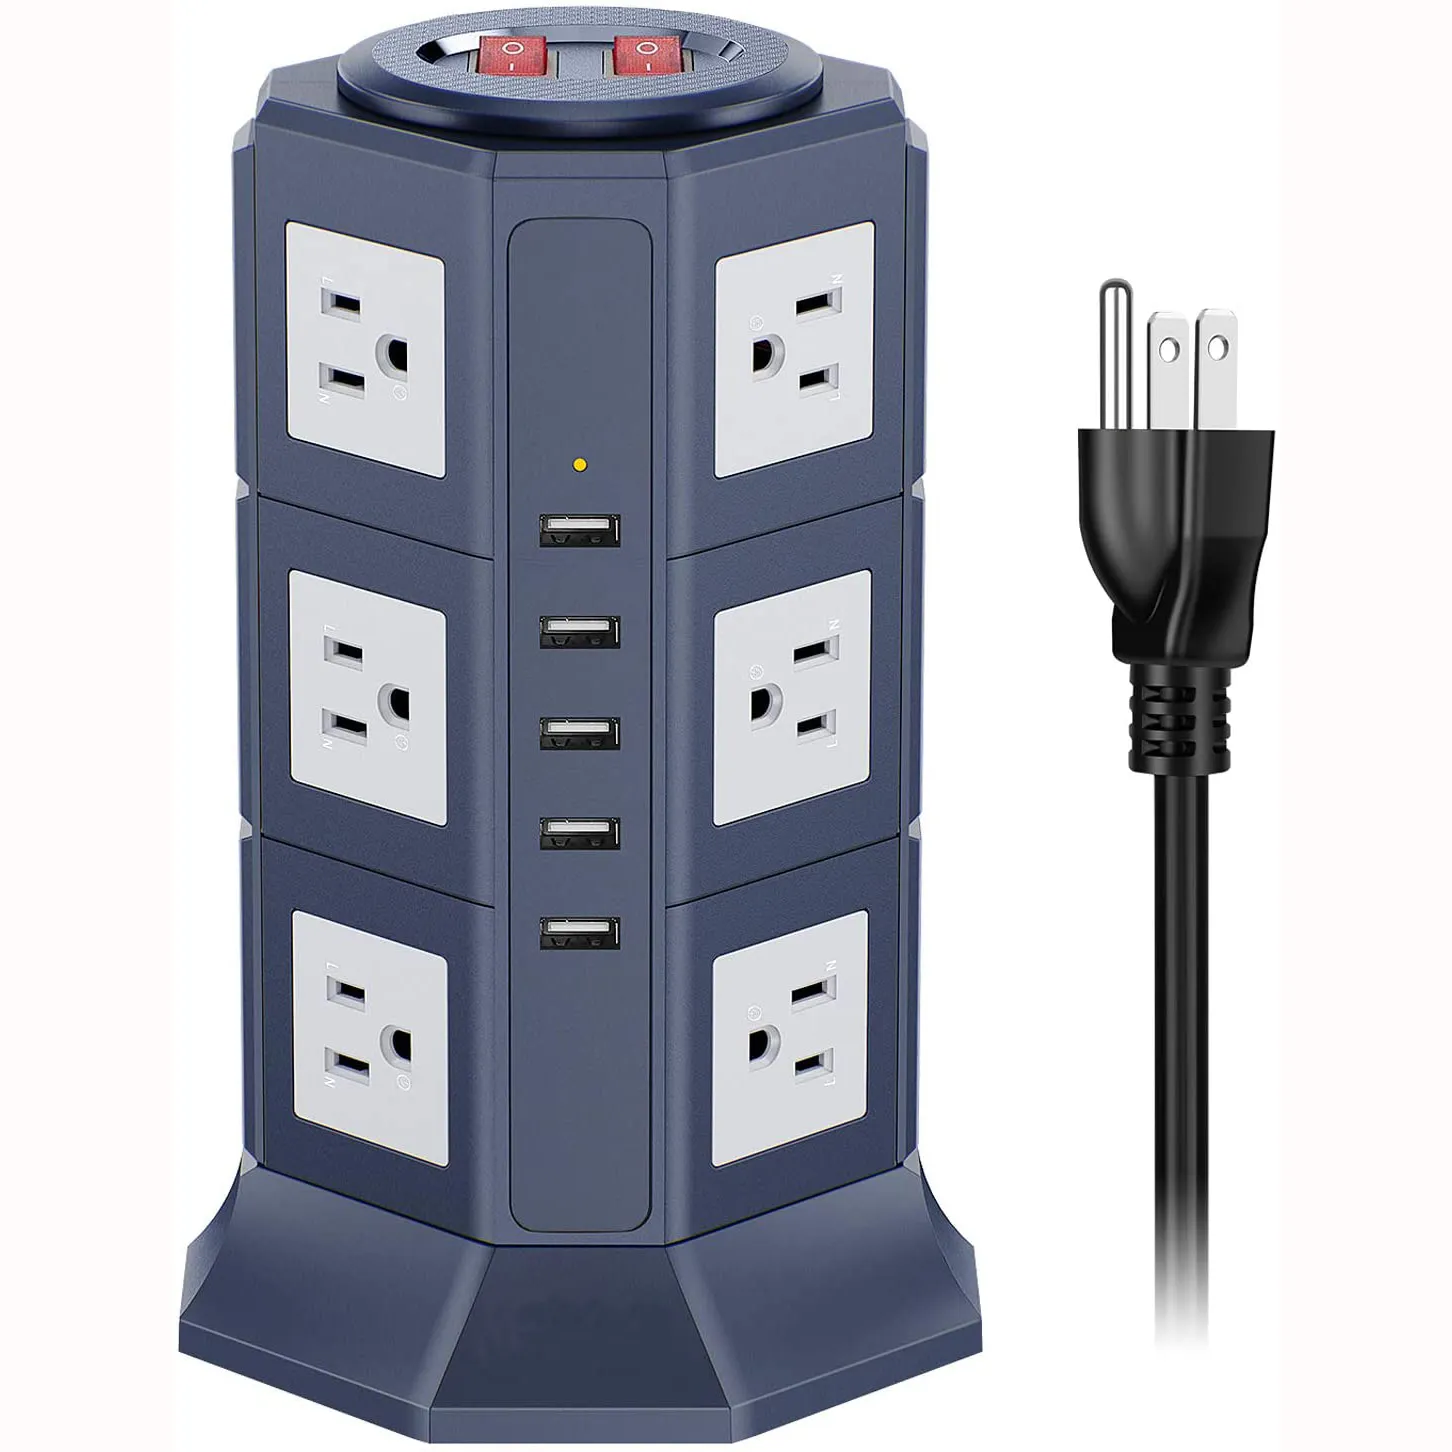 Tower Extension Cord with USB Power Strip 12-Outlet + USB Charging Station for Office and Home